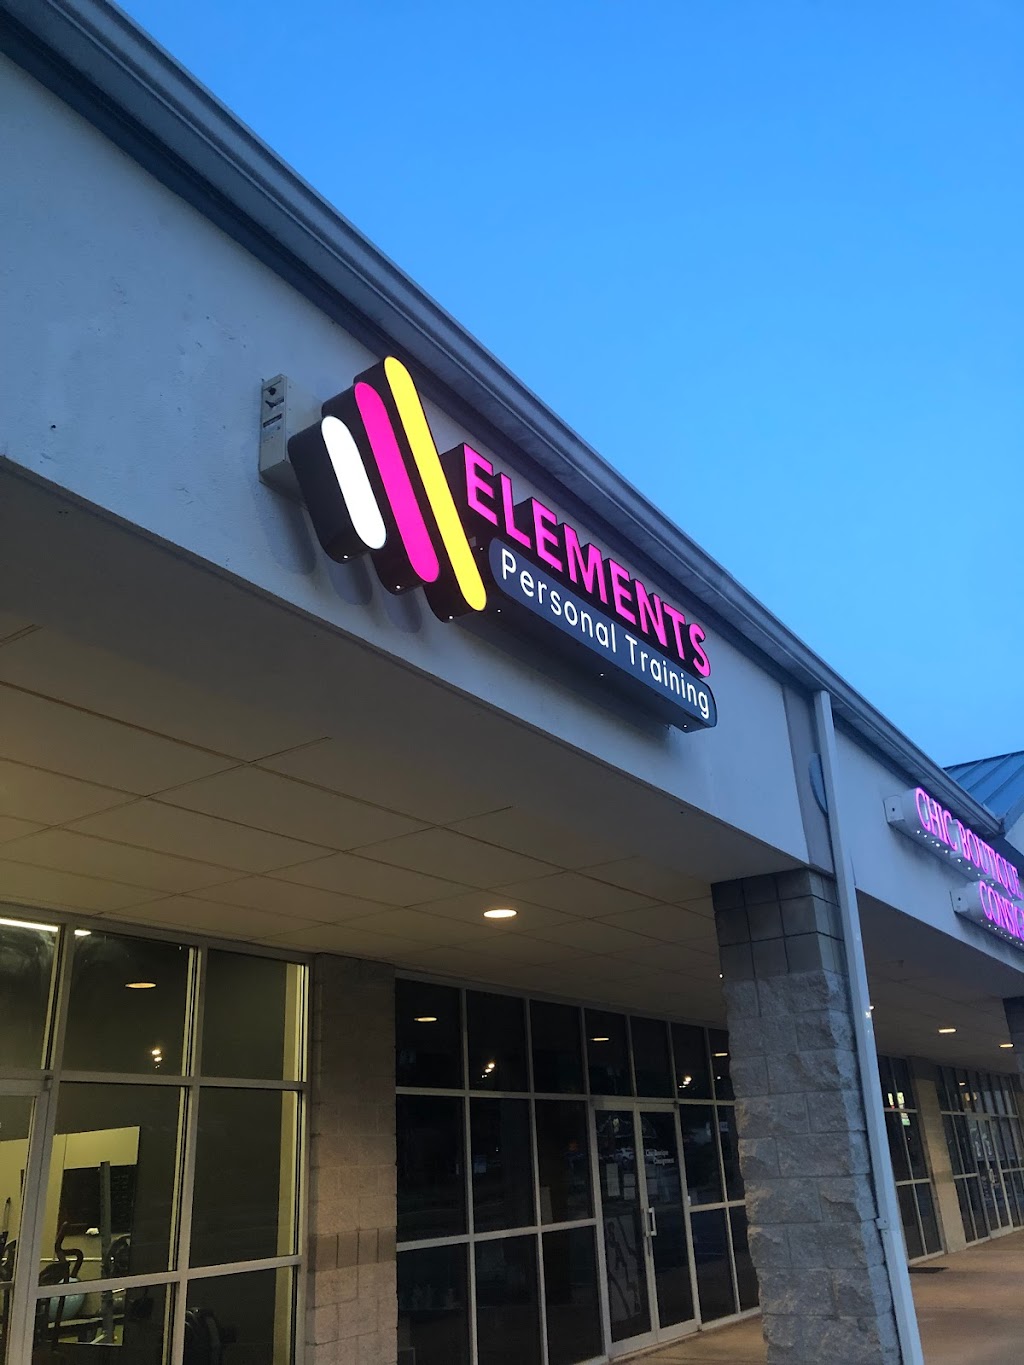 Elements Personal Training and Fitness | 2162 Silas Deane Hwy, Rocky Hill, CT 06067 | Phone: (860) 500-7705